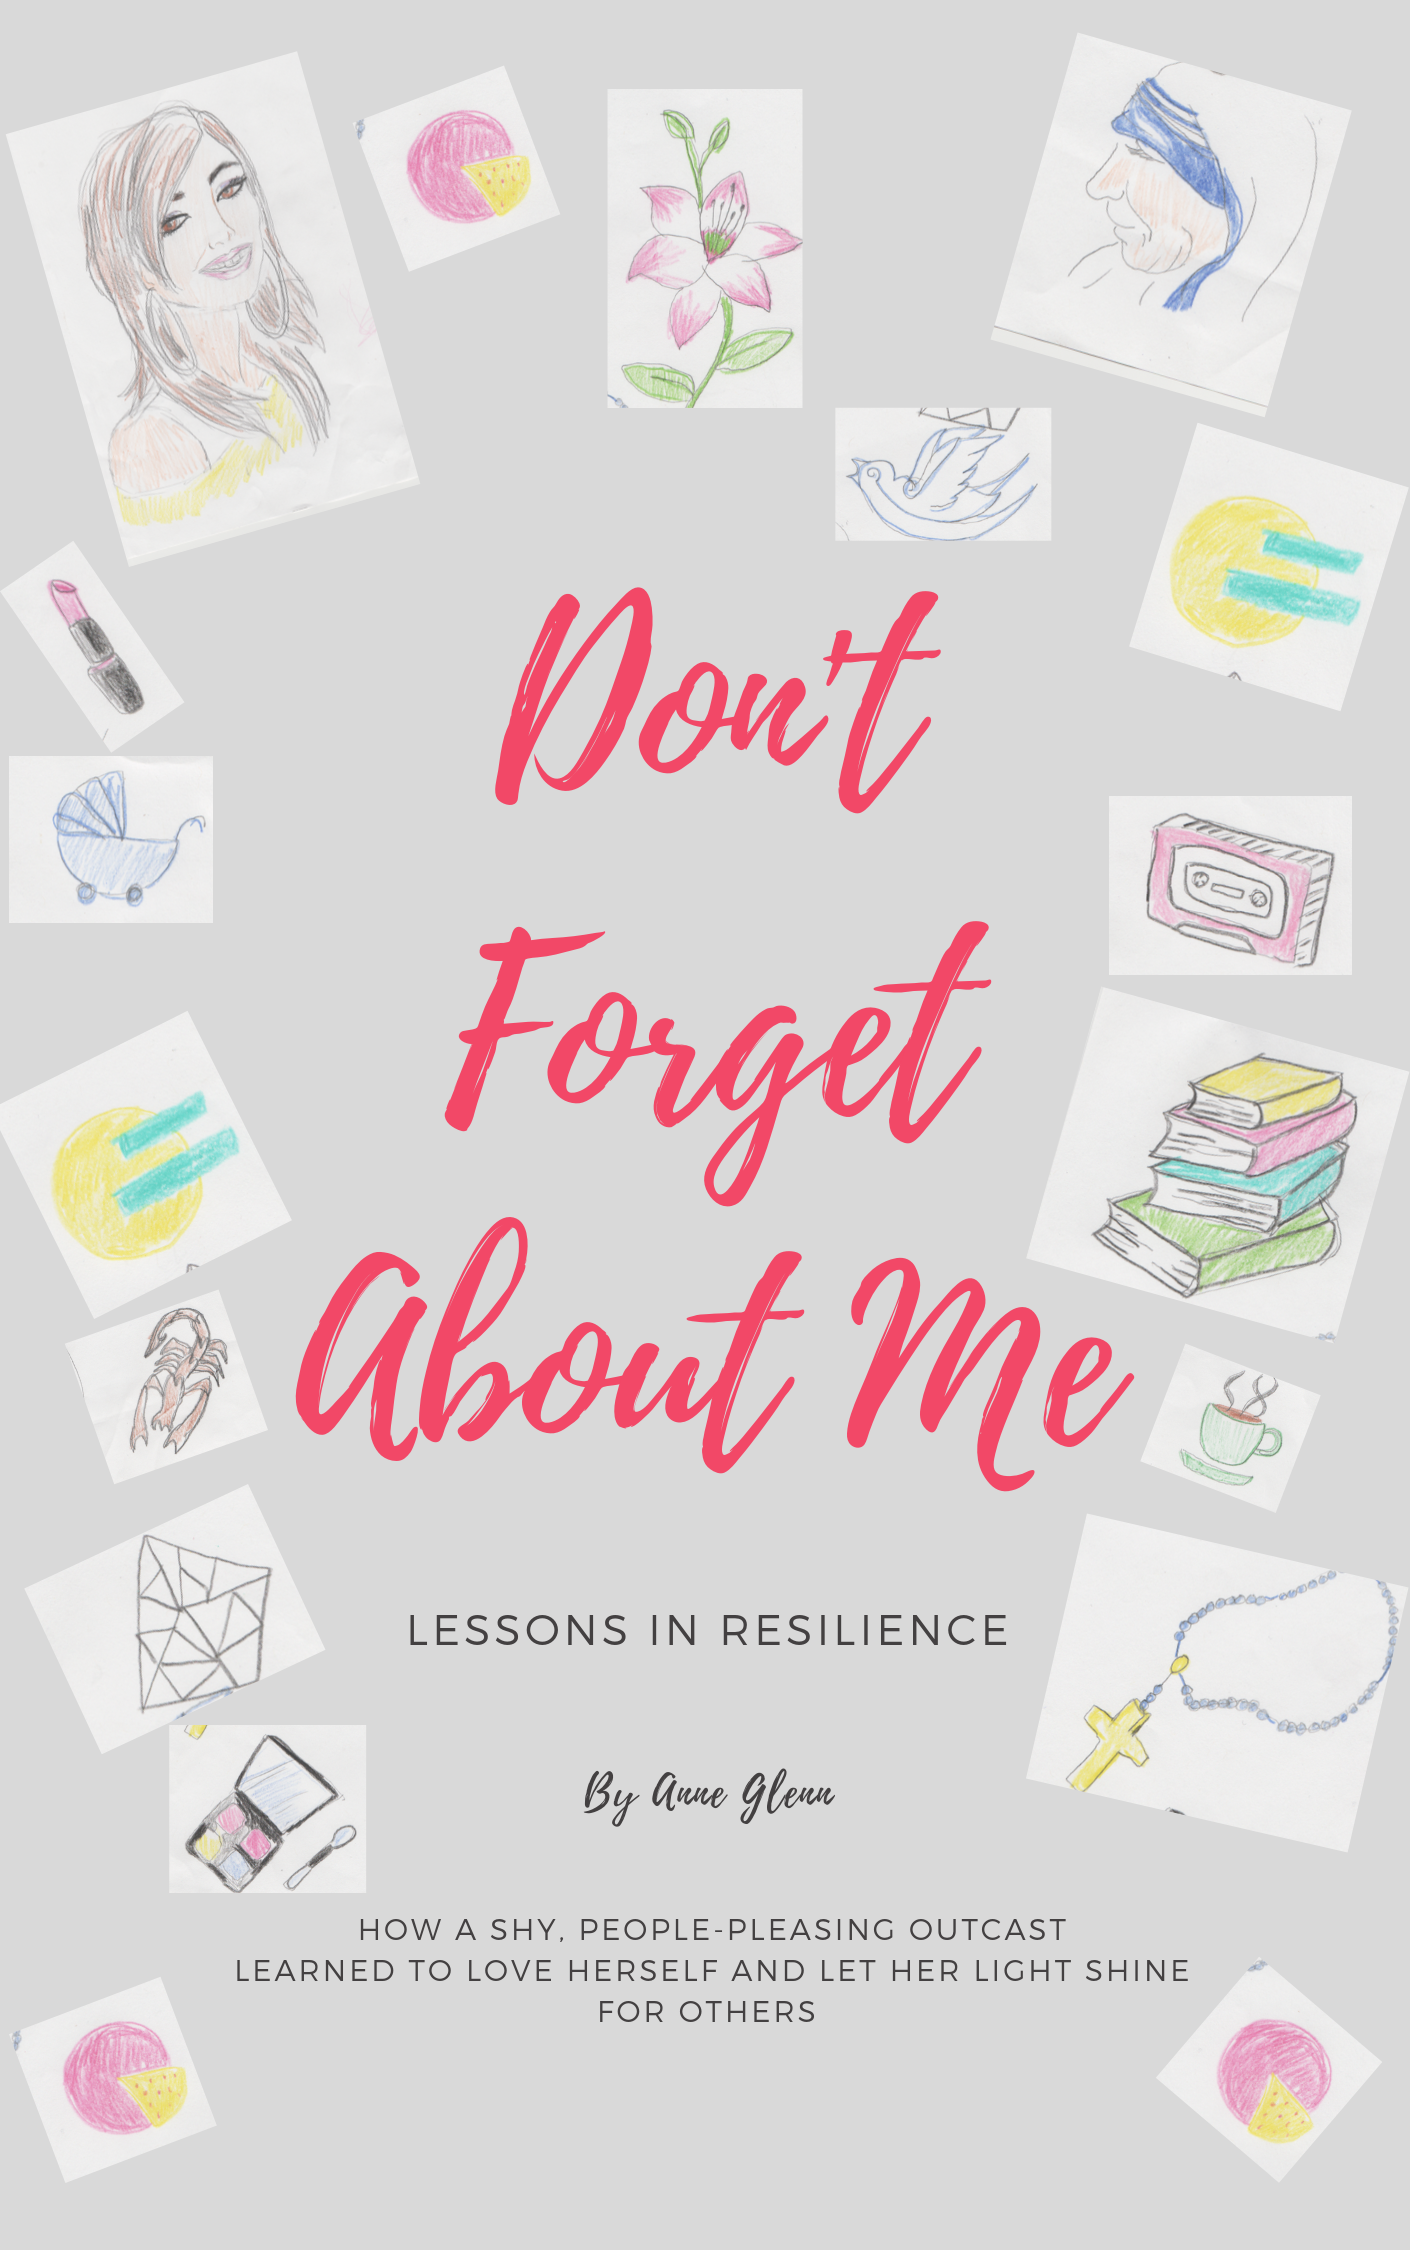 Book Cover: My New Book - Don't Forget About Me